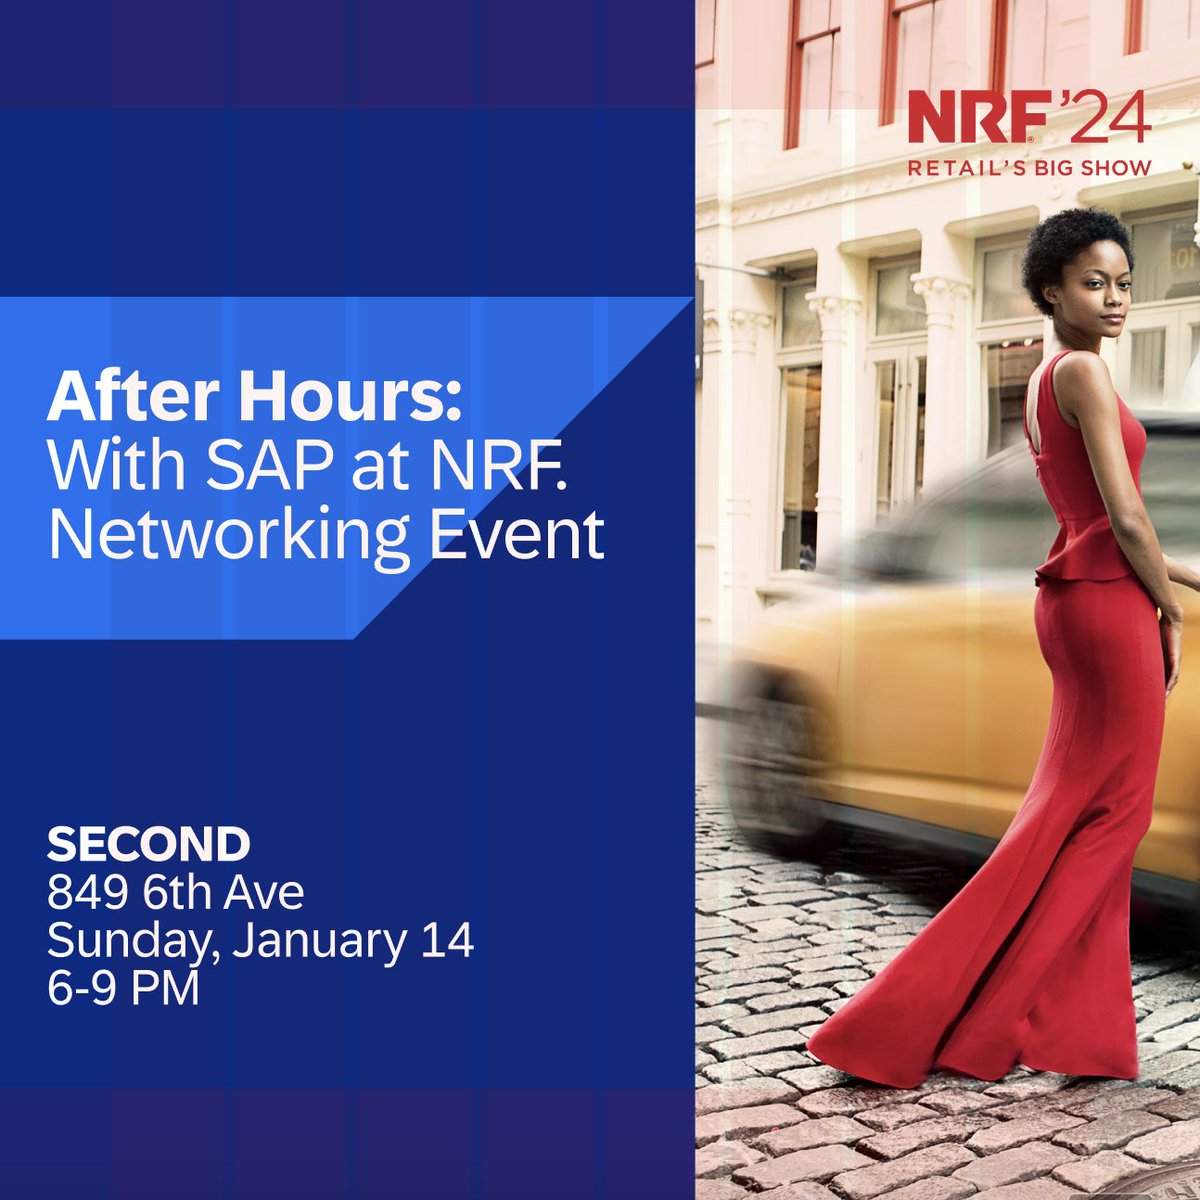 Dive into the future of retail, after hours, with SAP at #NRF2024! 🌙
Experience more - with SAP, including exclusive networking, insights, and fun at SECOND.

Thanks to co-sponsors @PwC, @Axonify, @coveo, @DunnSolutions, @icertis & @thomsonreuters! sap.to/6011RcE8T